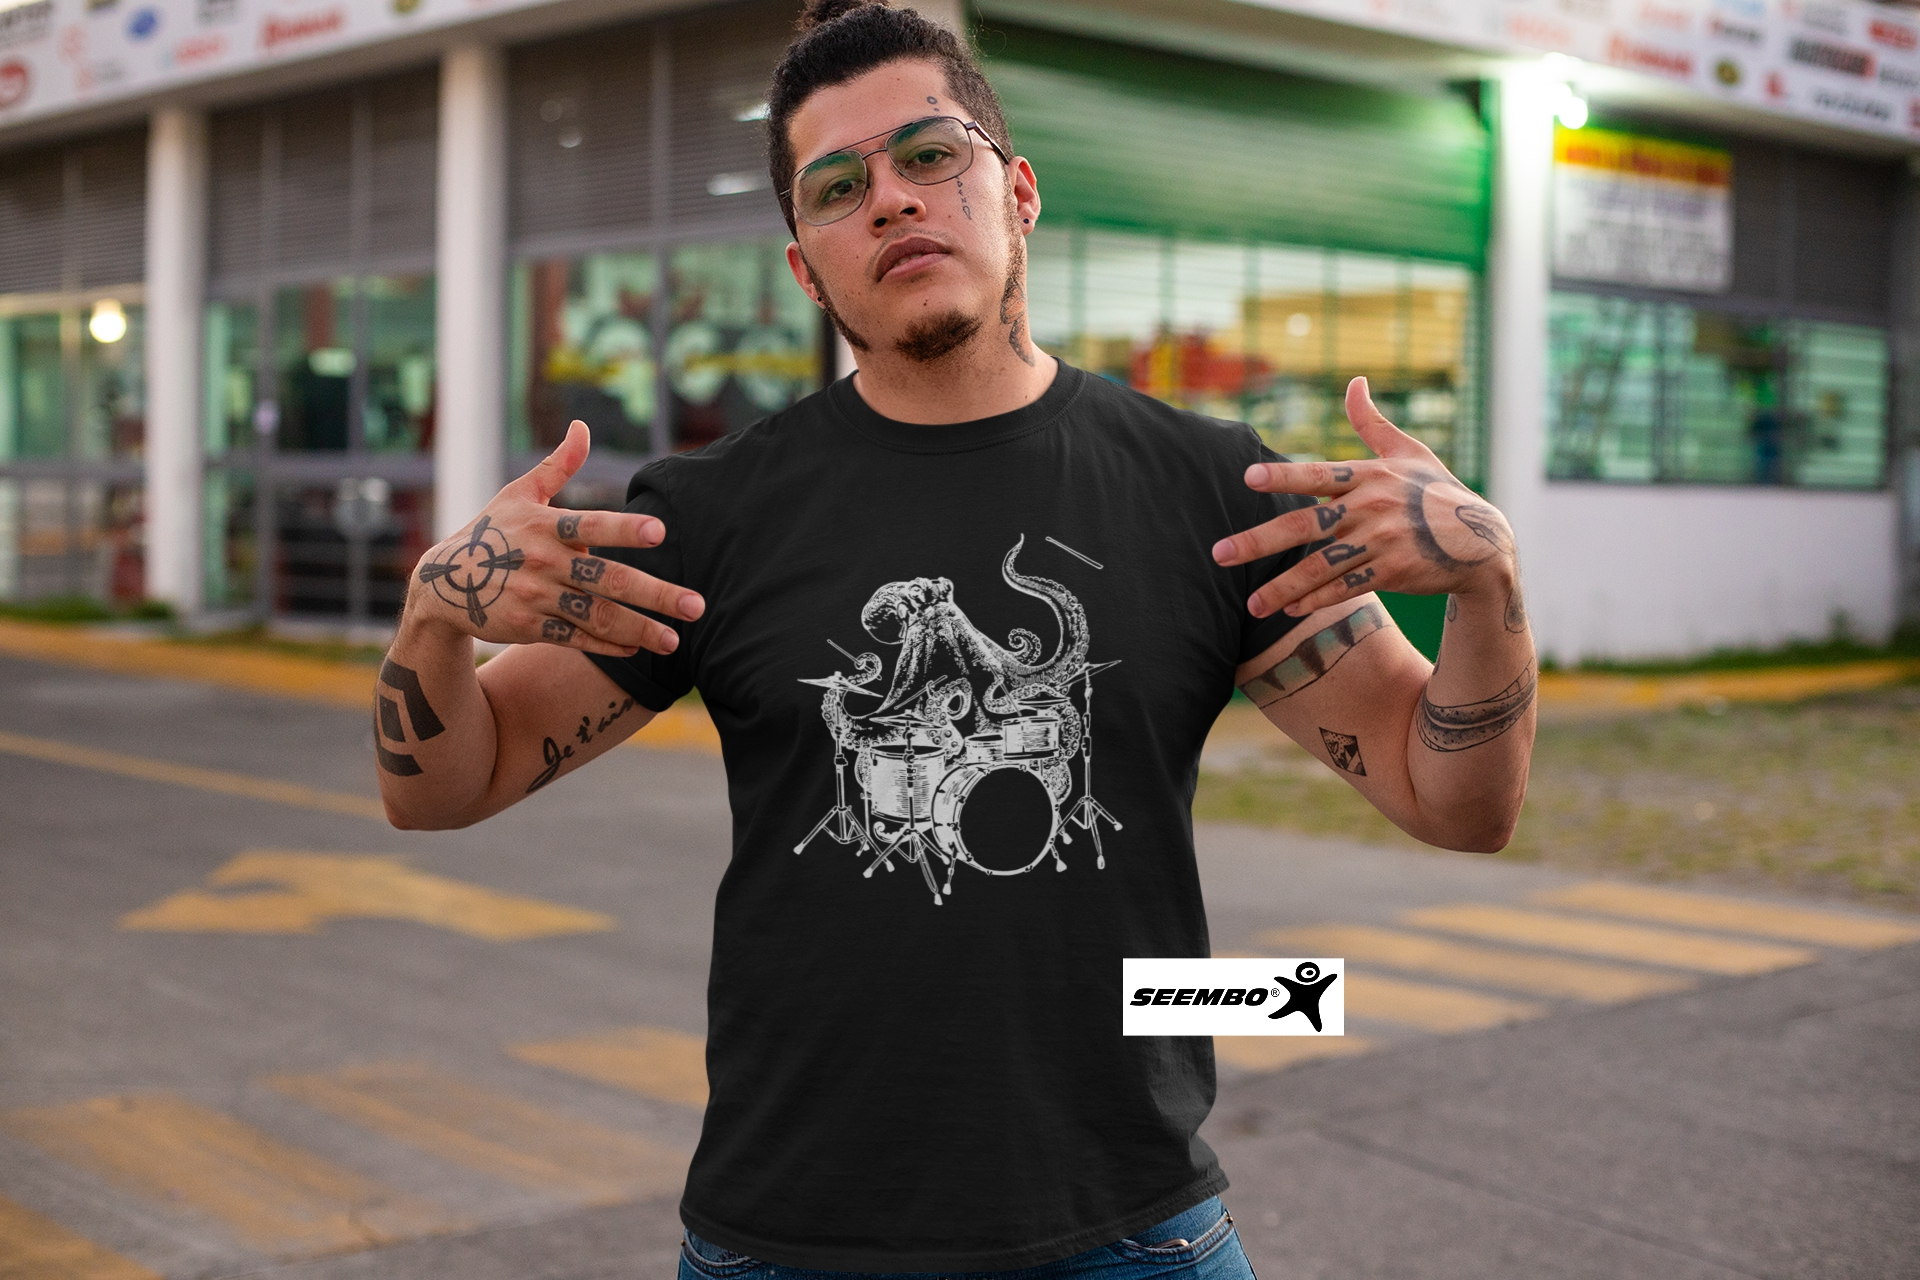 seembo-octopus-playing-drums-black-t-shirt-of-a-man-showing-swag-on-the-street-ipe65